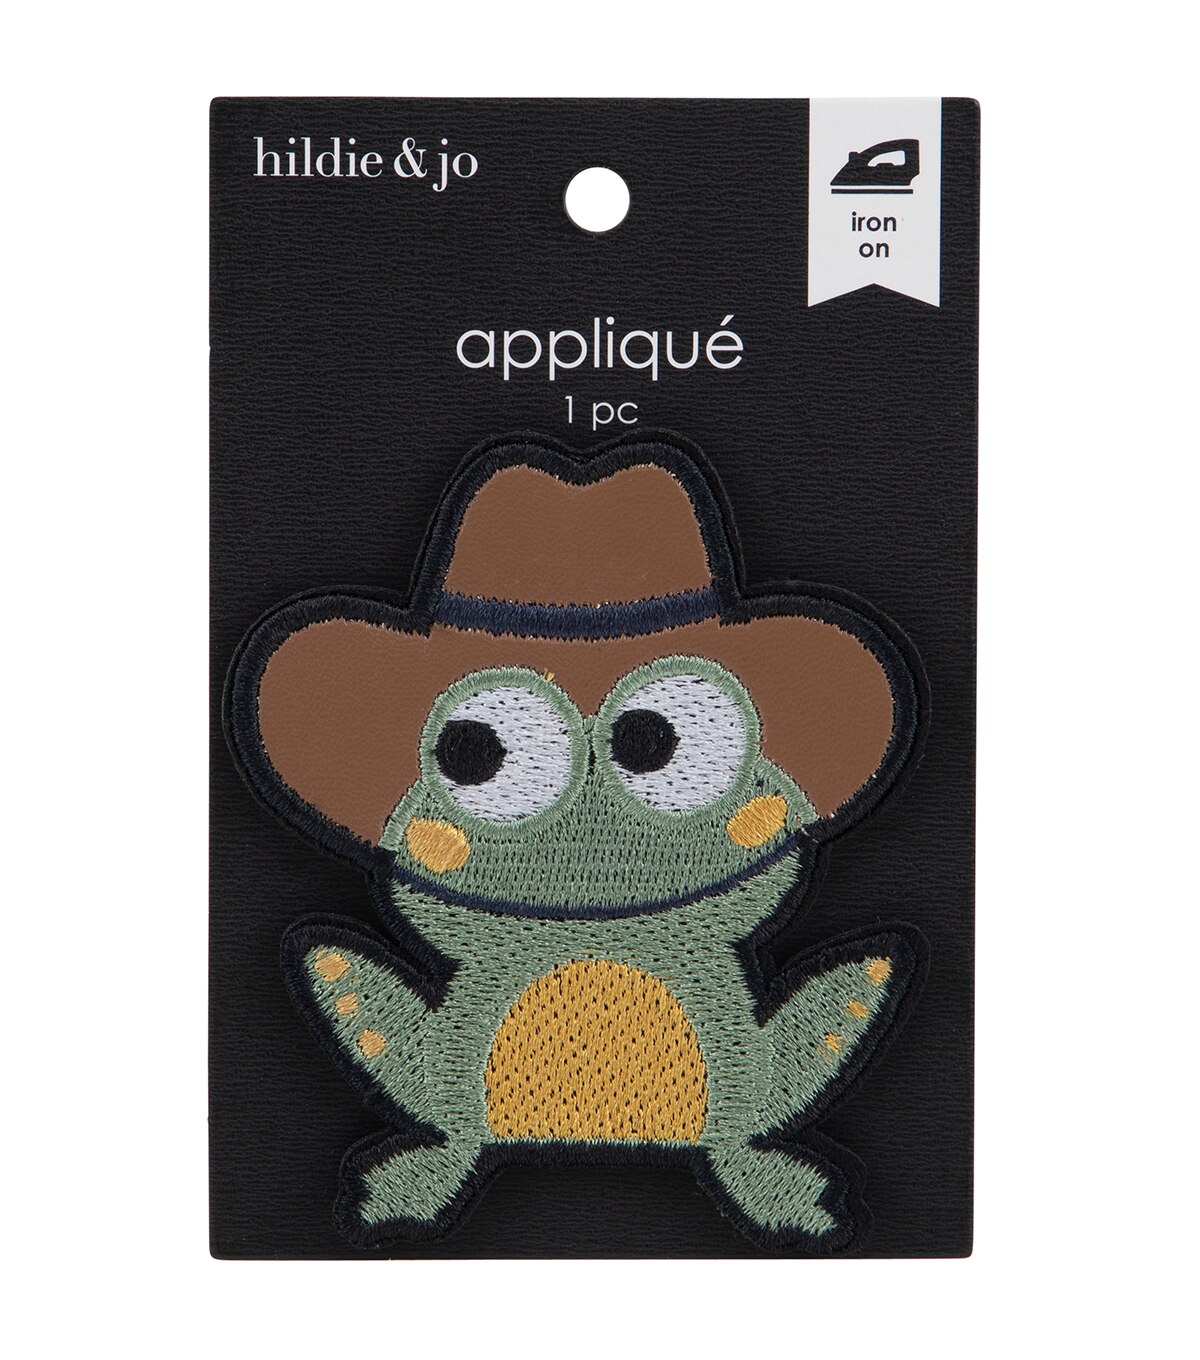 3 Cowboy Frog Iron On Patch by hildie & jo